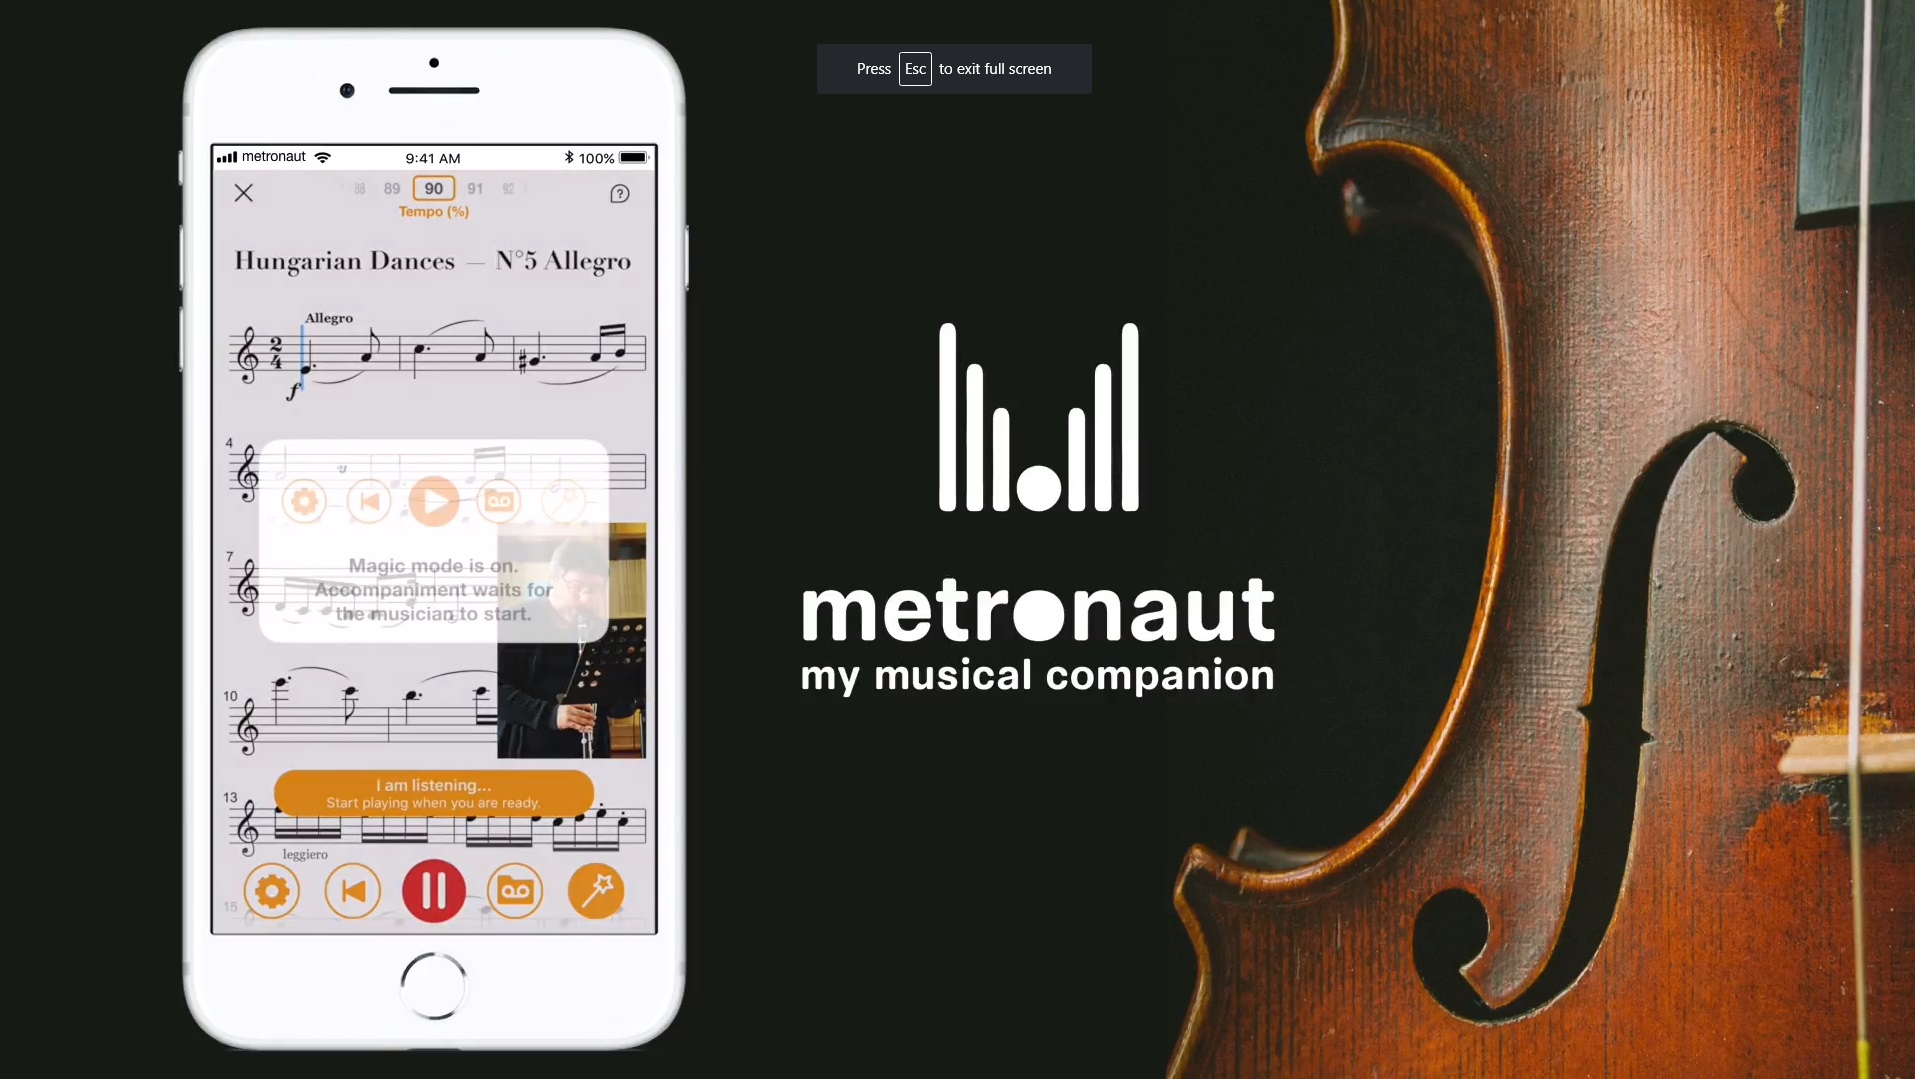 Play with an entire orchestra through one simple app